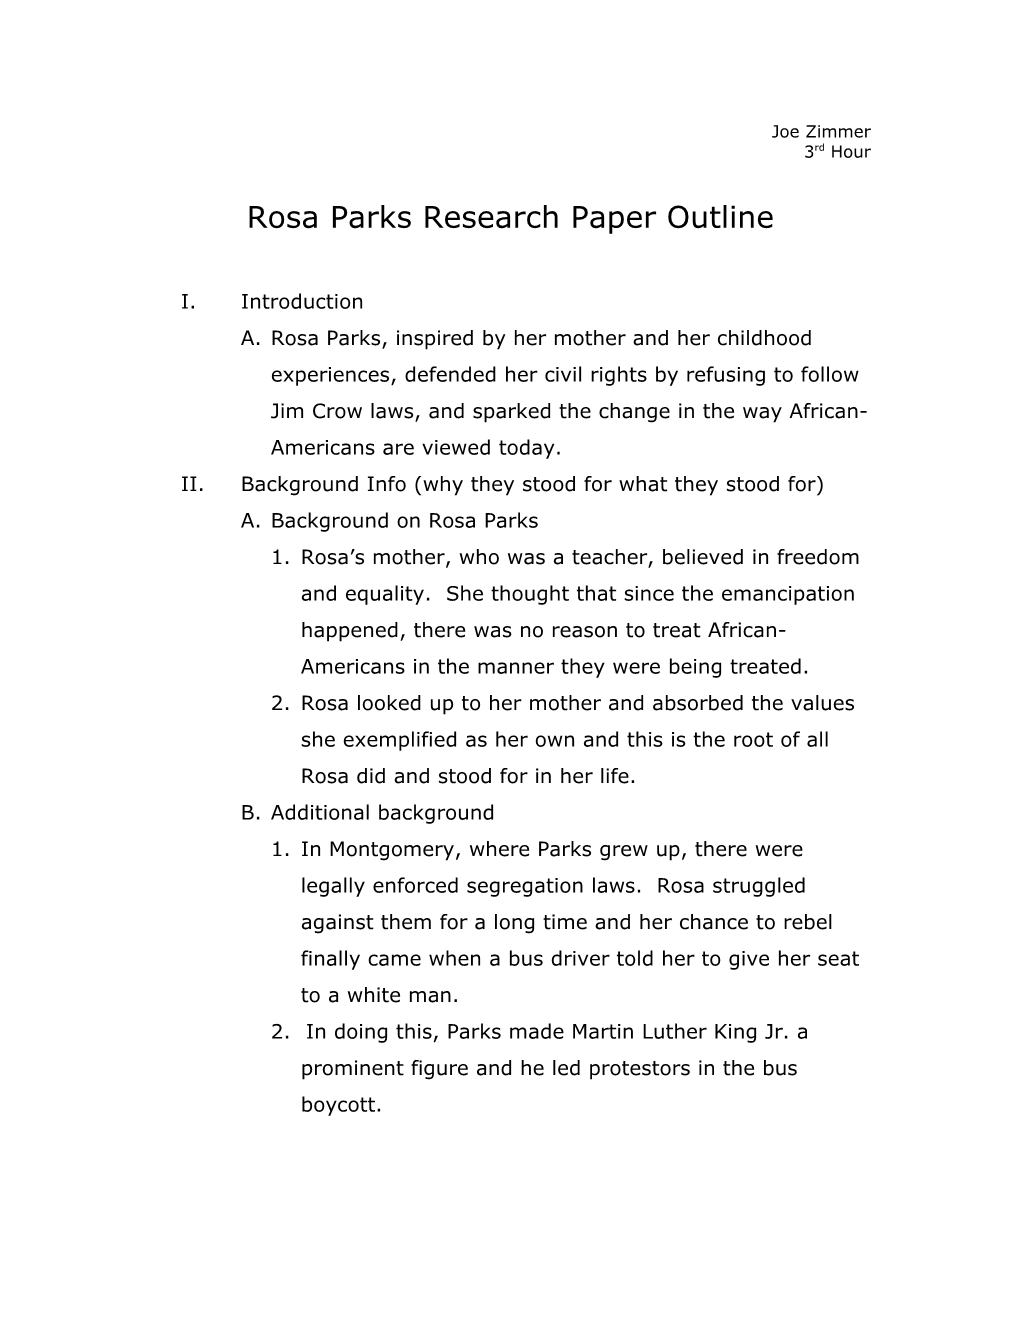 Rosa Parks Research Paper Outline